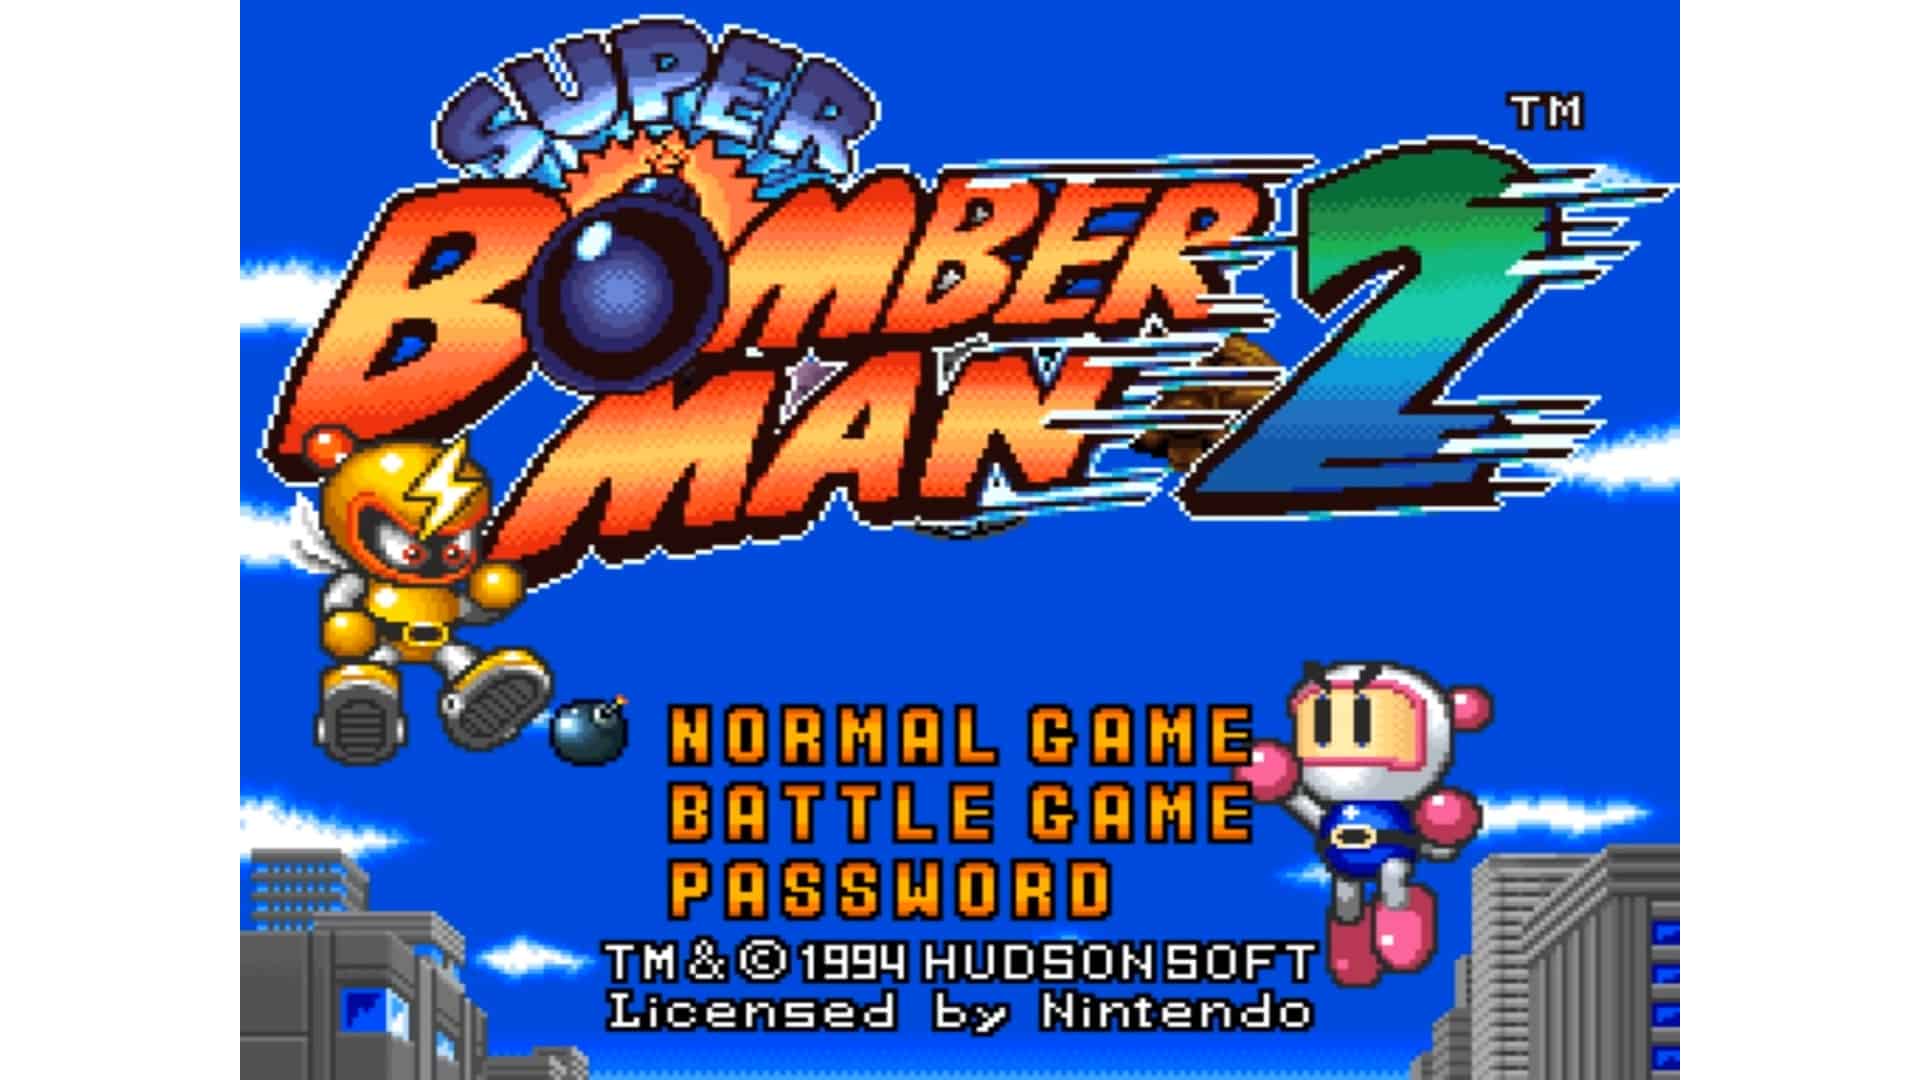 An in-game screenshot from Super Bomberman 2.